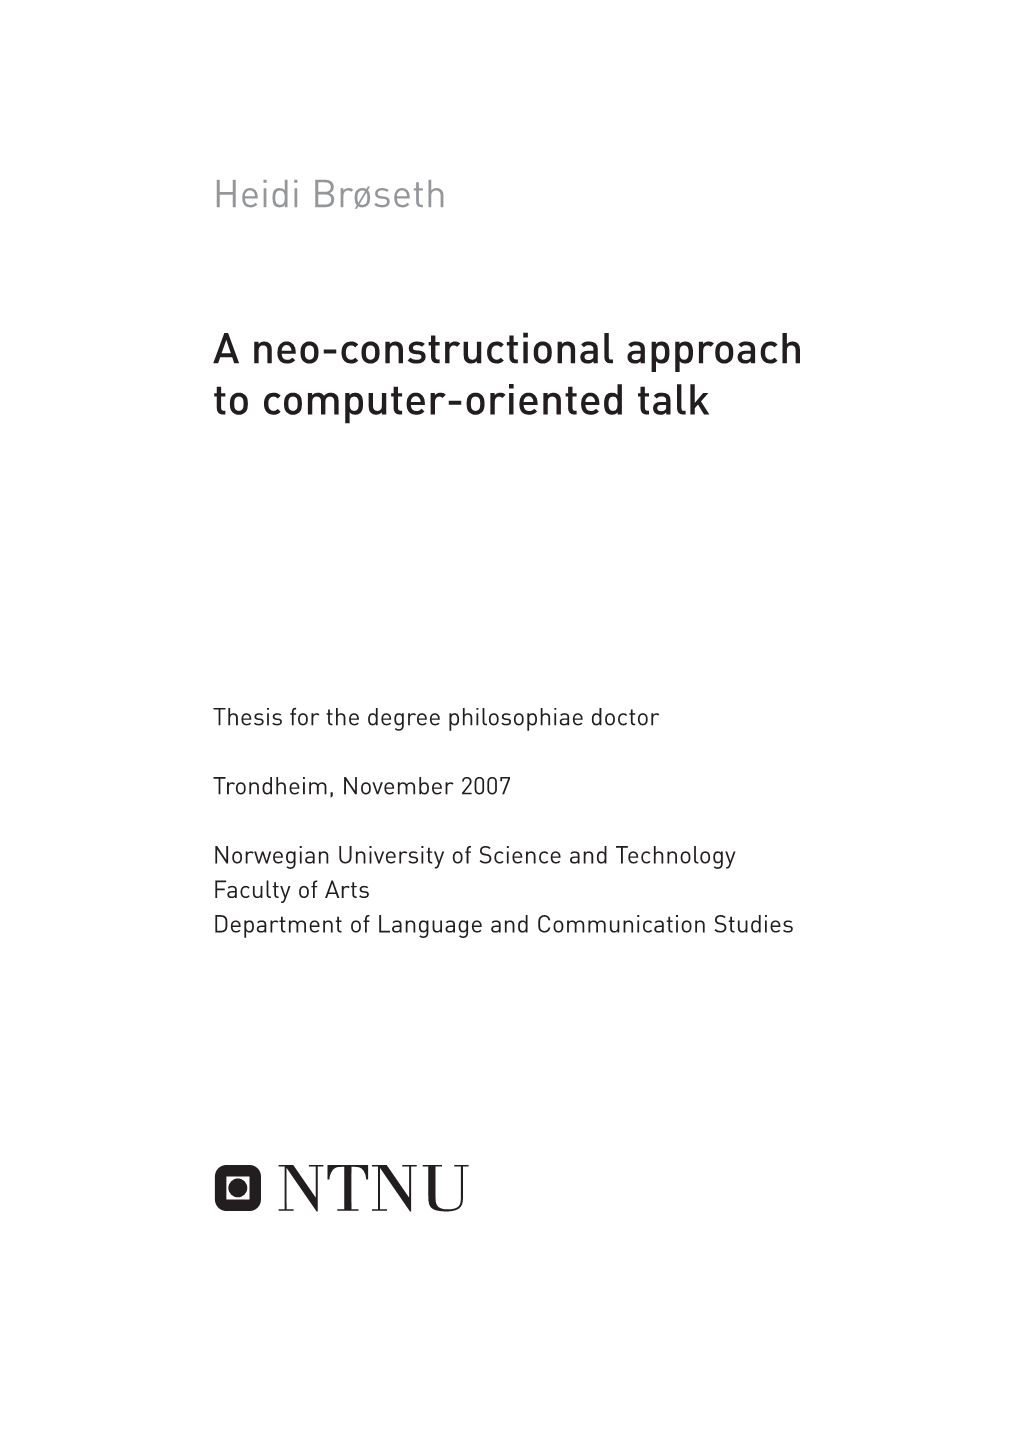 A Neo-Constructional Approach to Computer-Oriented Talk